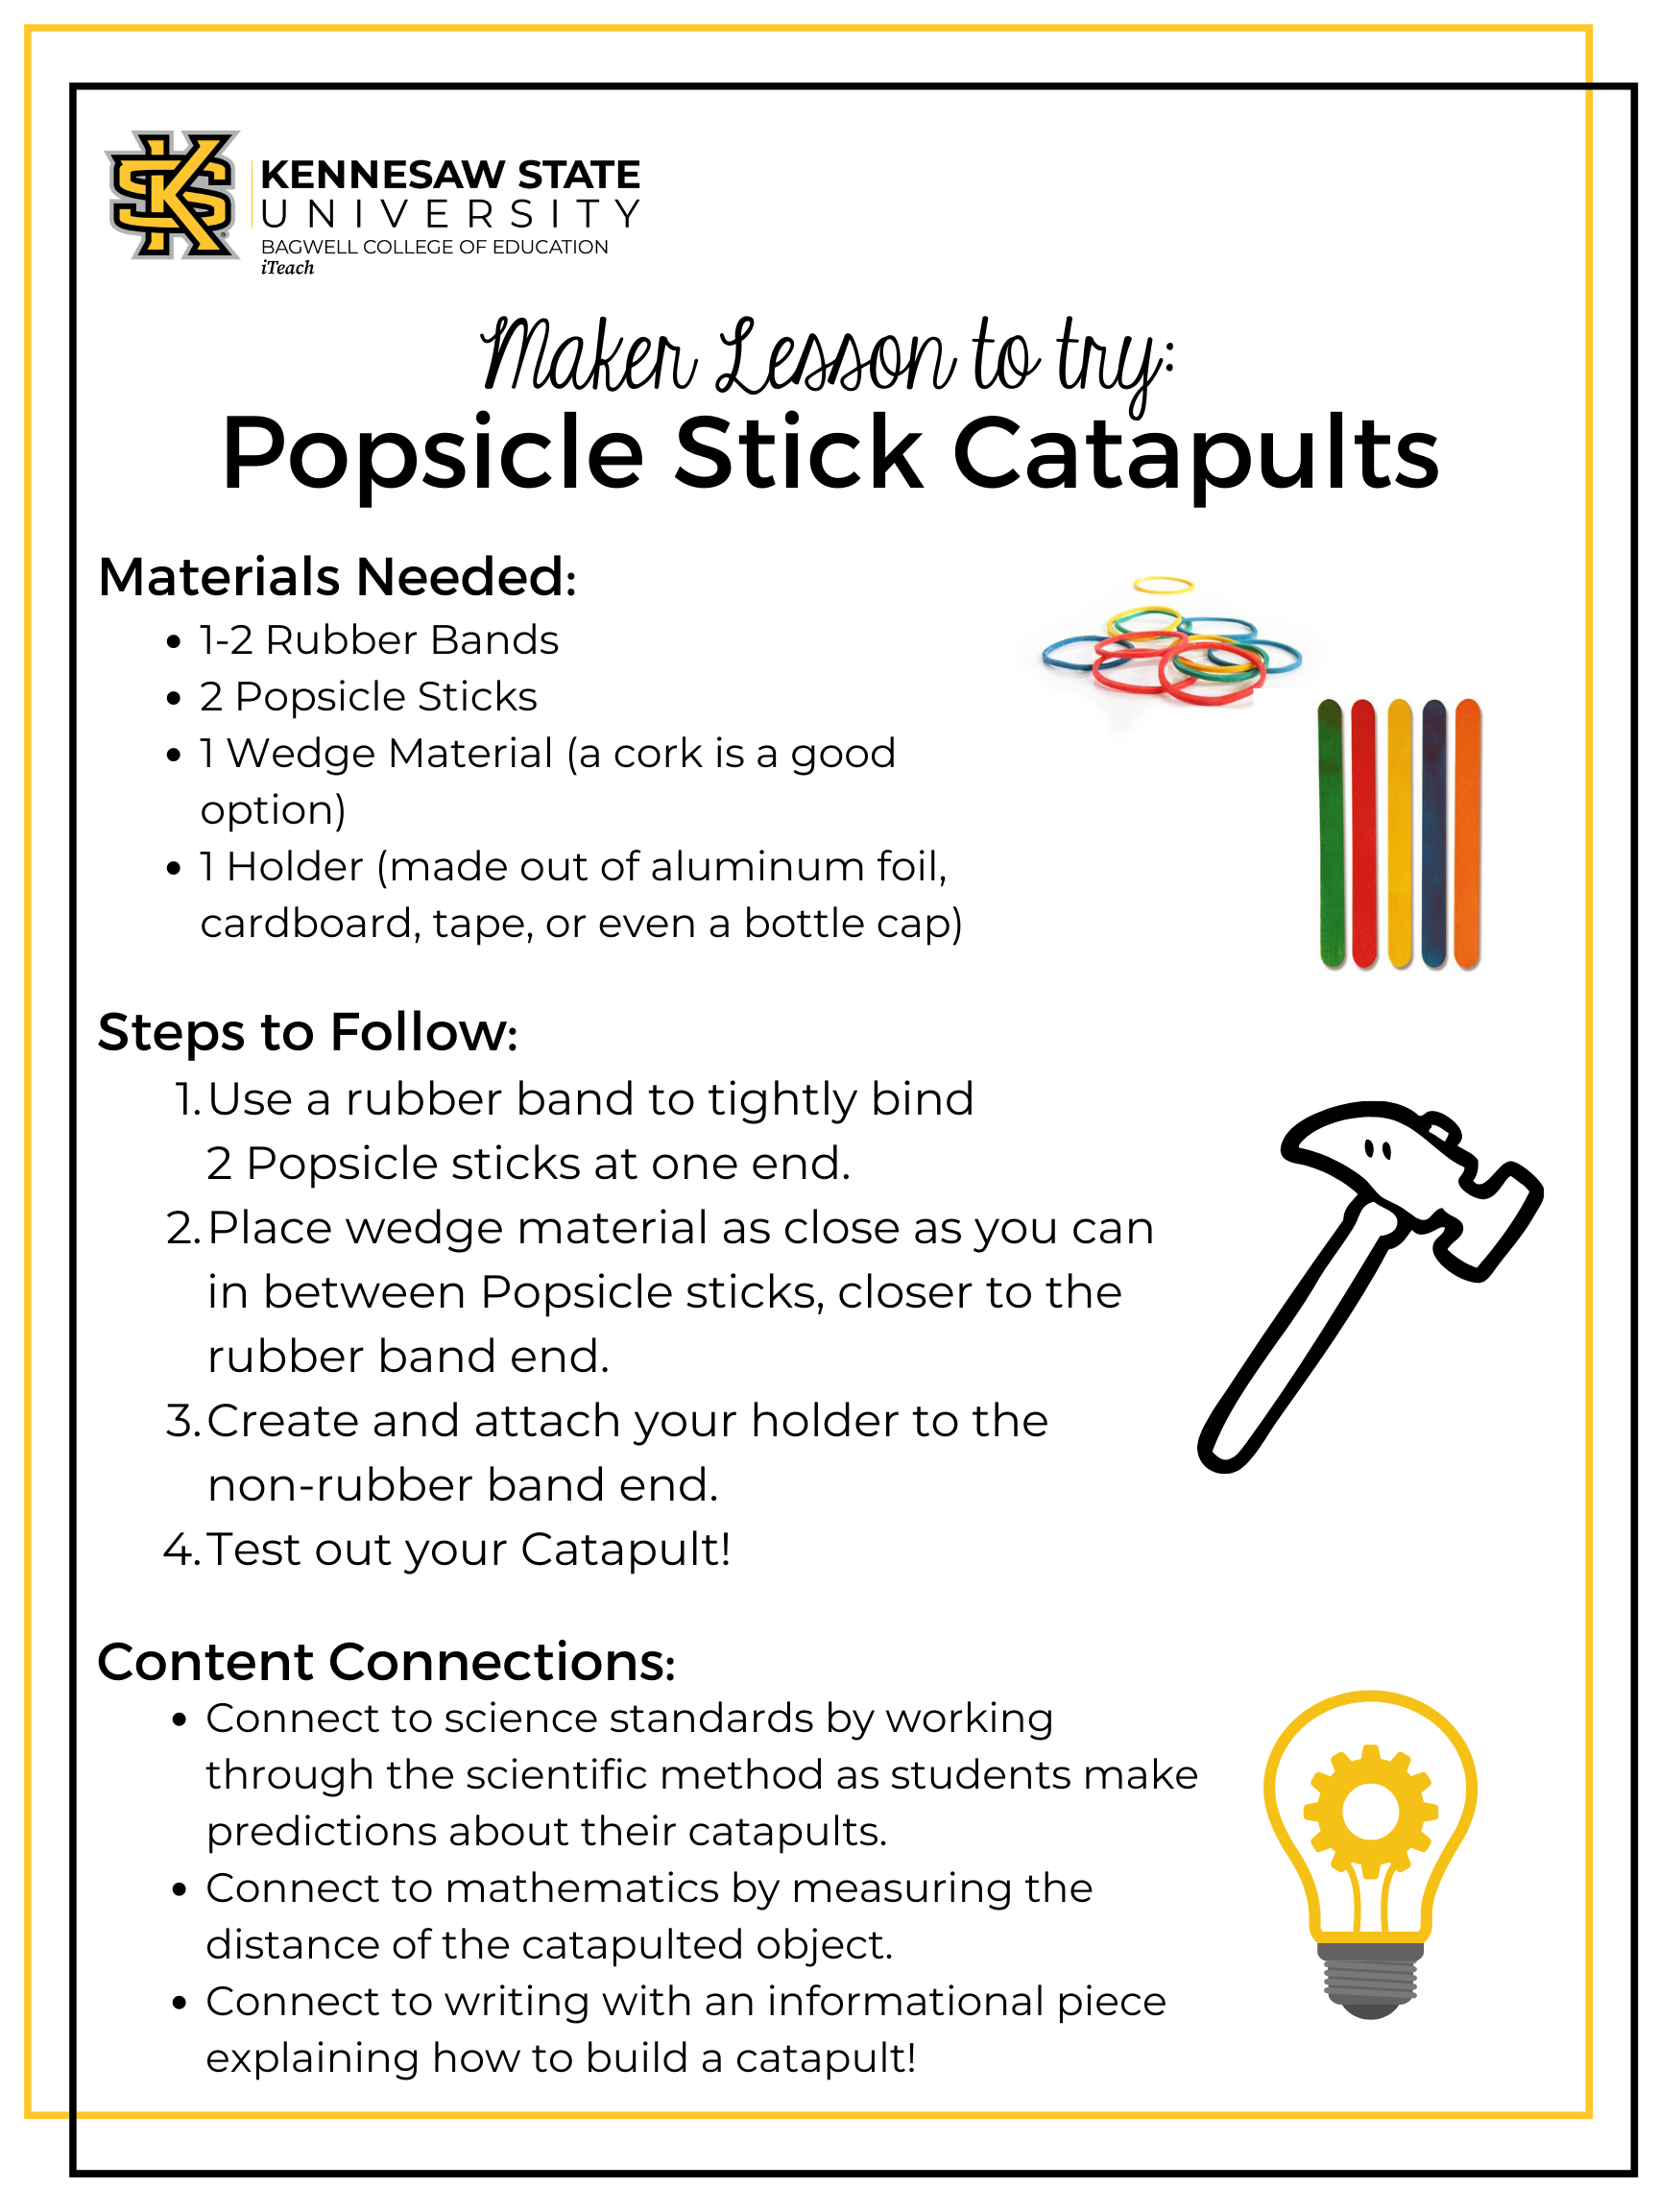 Popsicle Stick Catapults.png